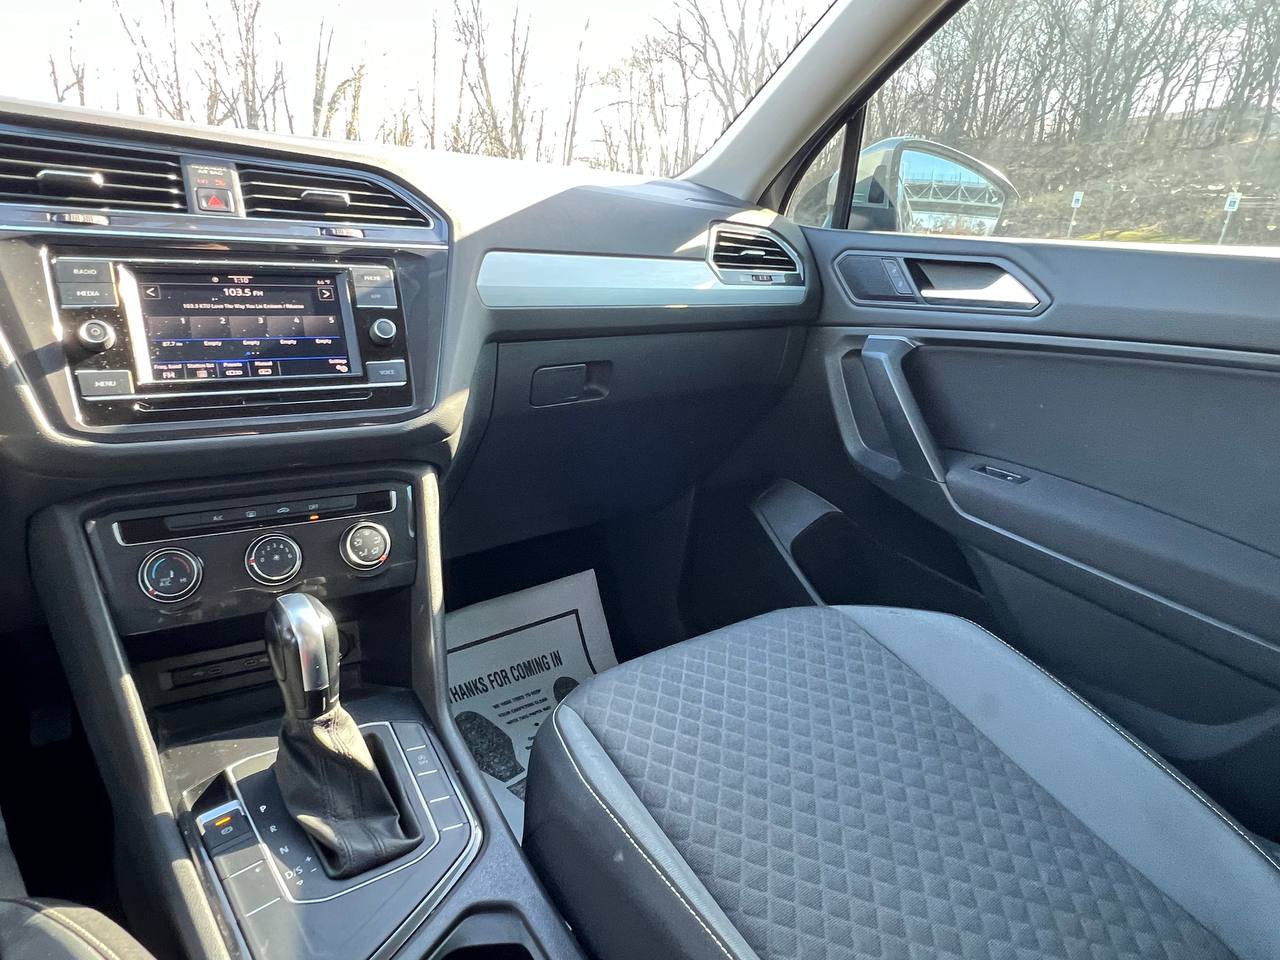 Used - Volkswagen Tiguan S SUV for sale in Staten Island NY